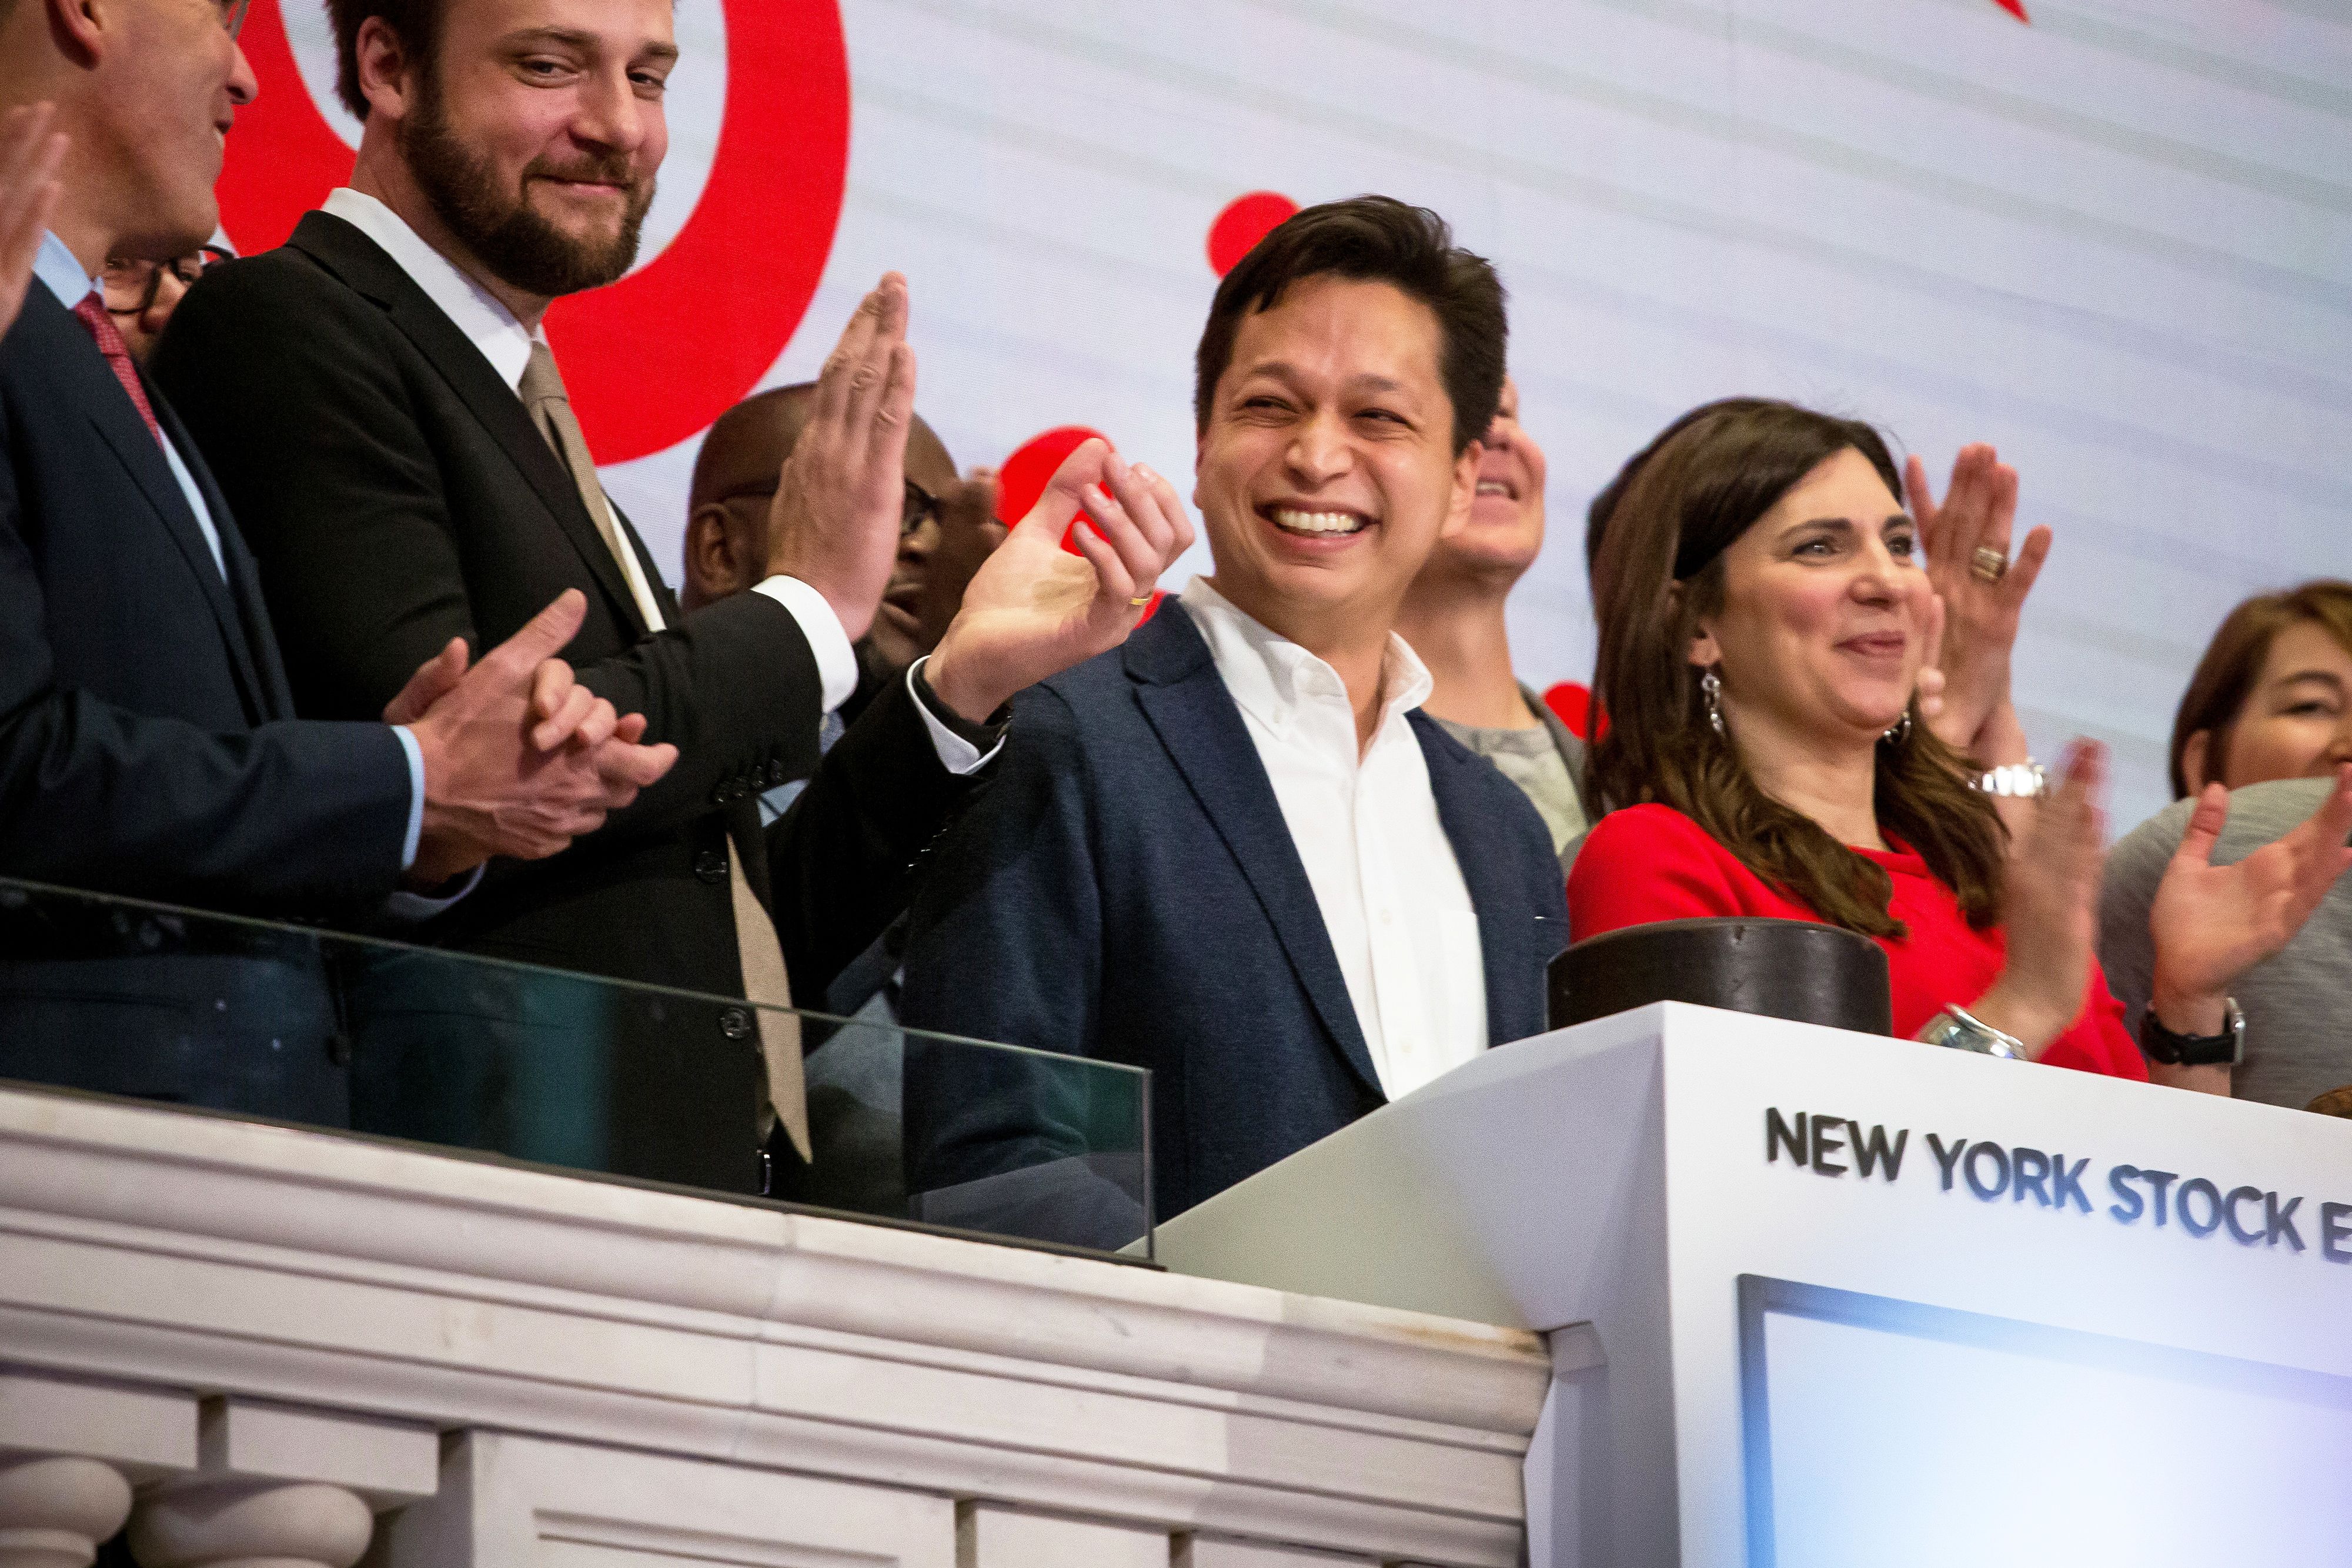 Pinterest up as much as 12% as post-IPO rally continues